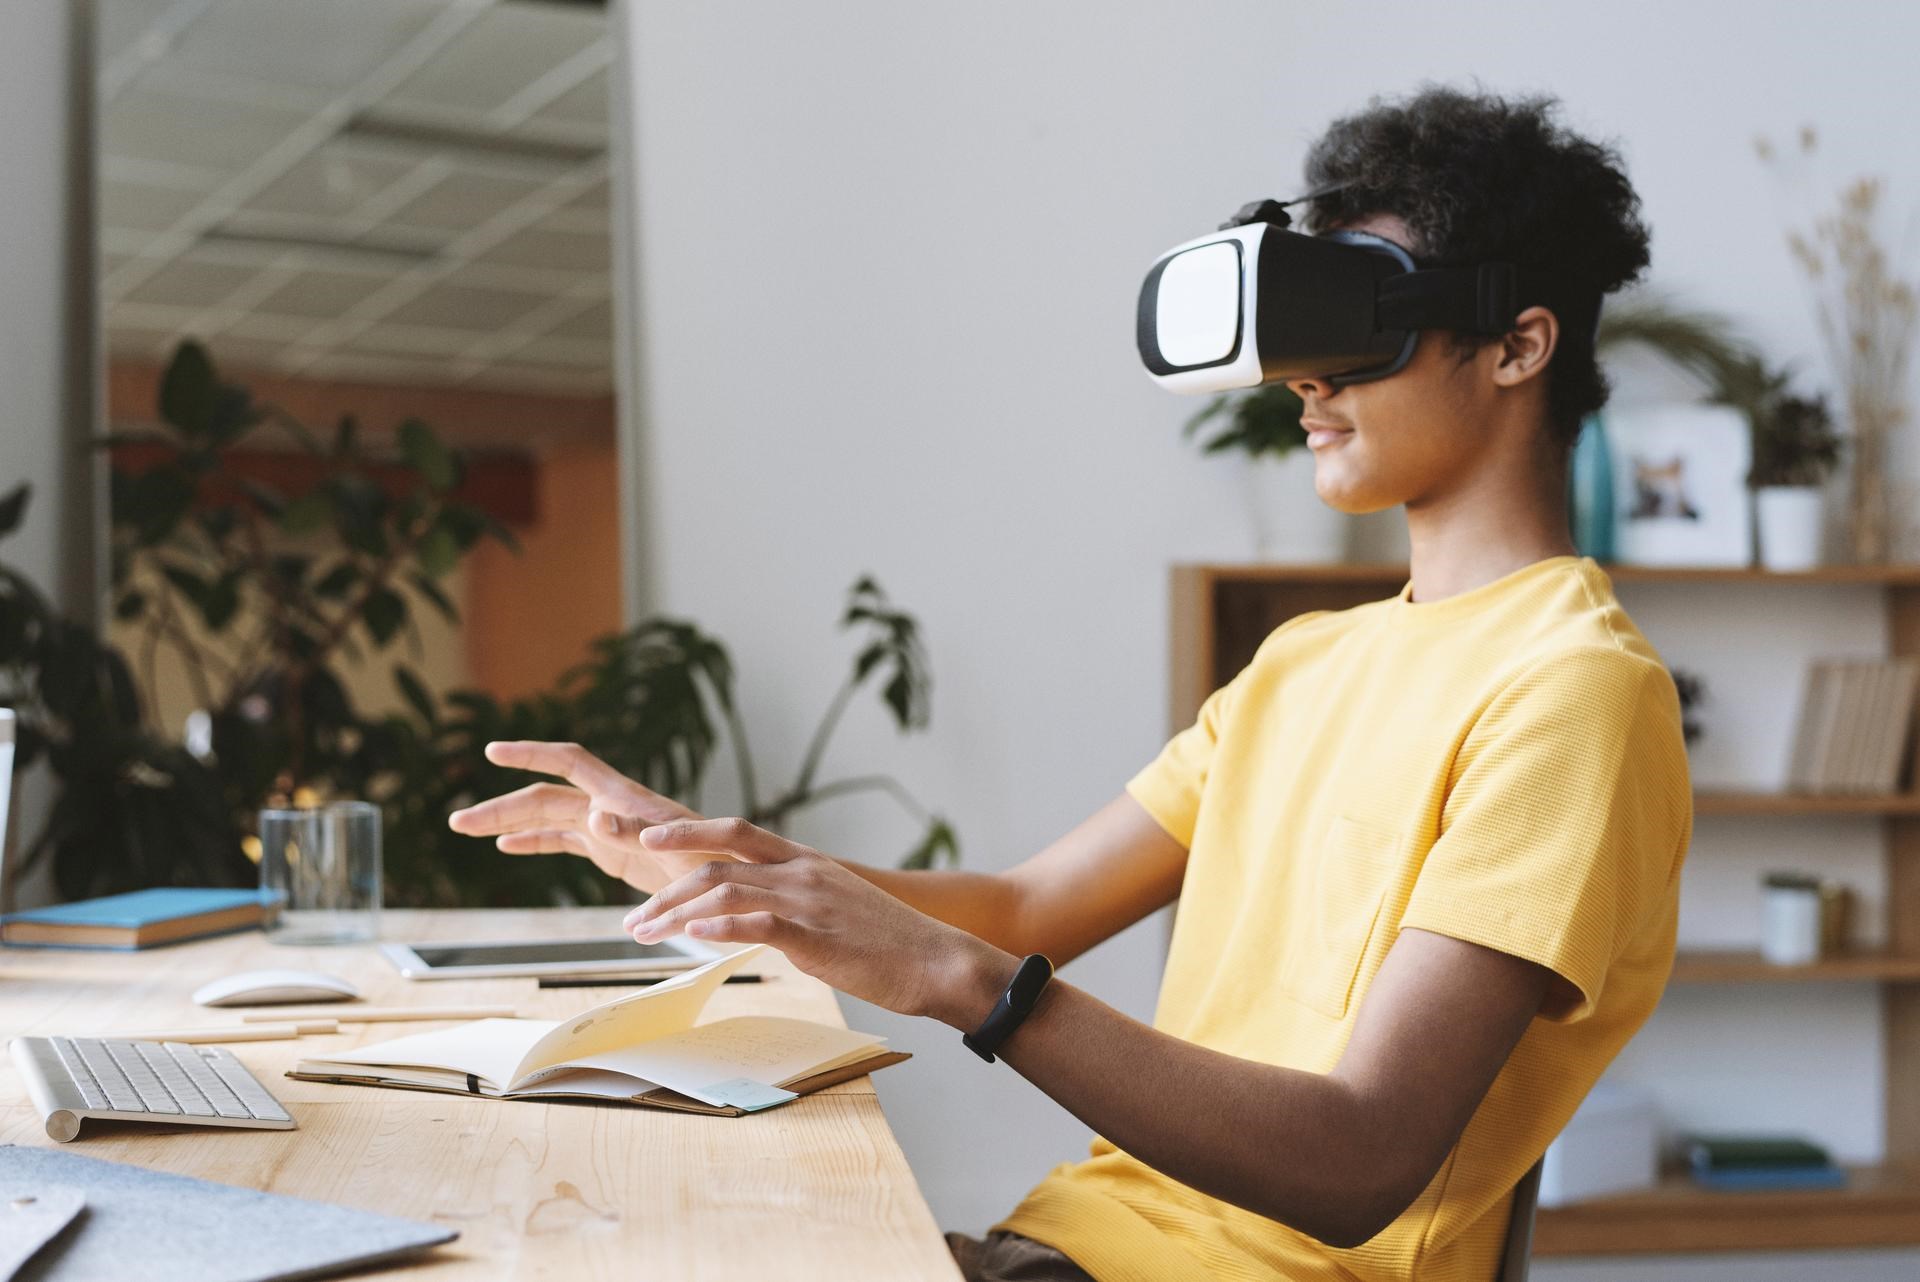 Augmented Reality and Virtual Reality in Healthcare